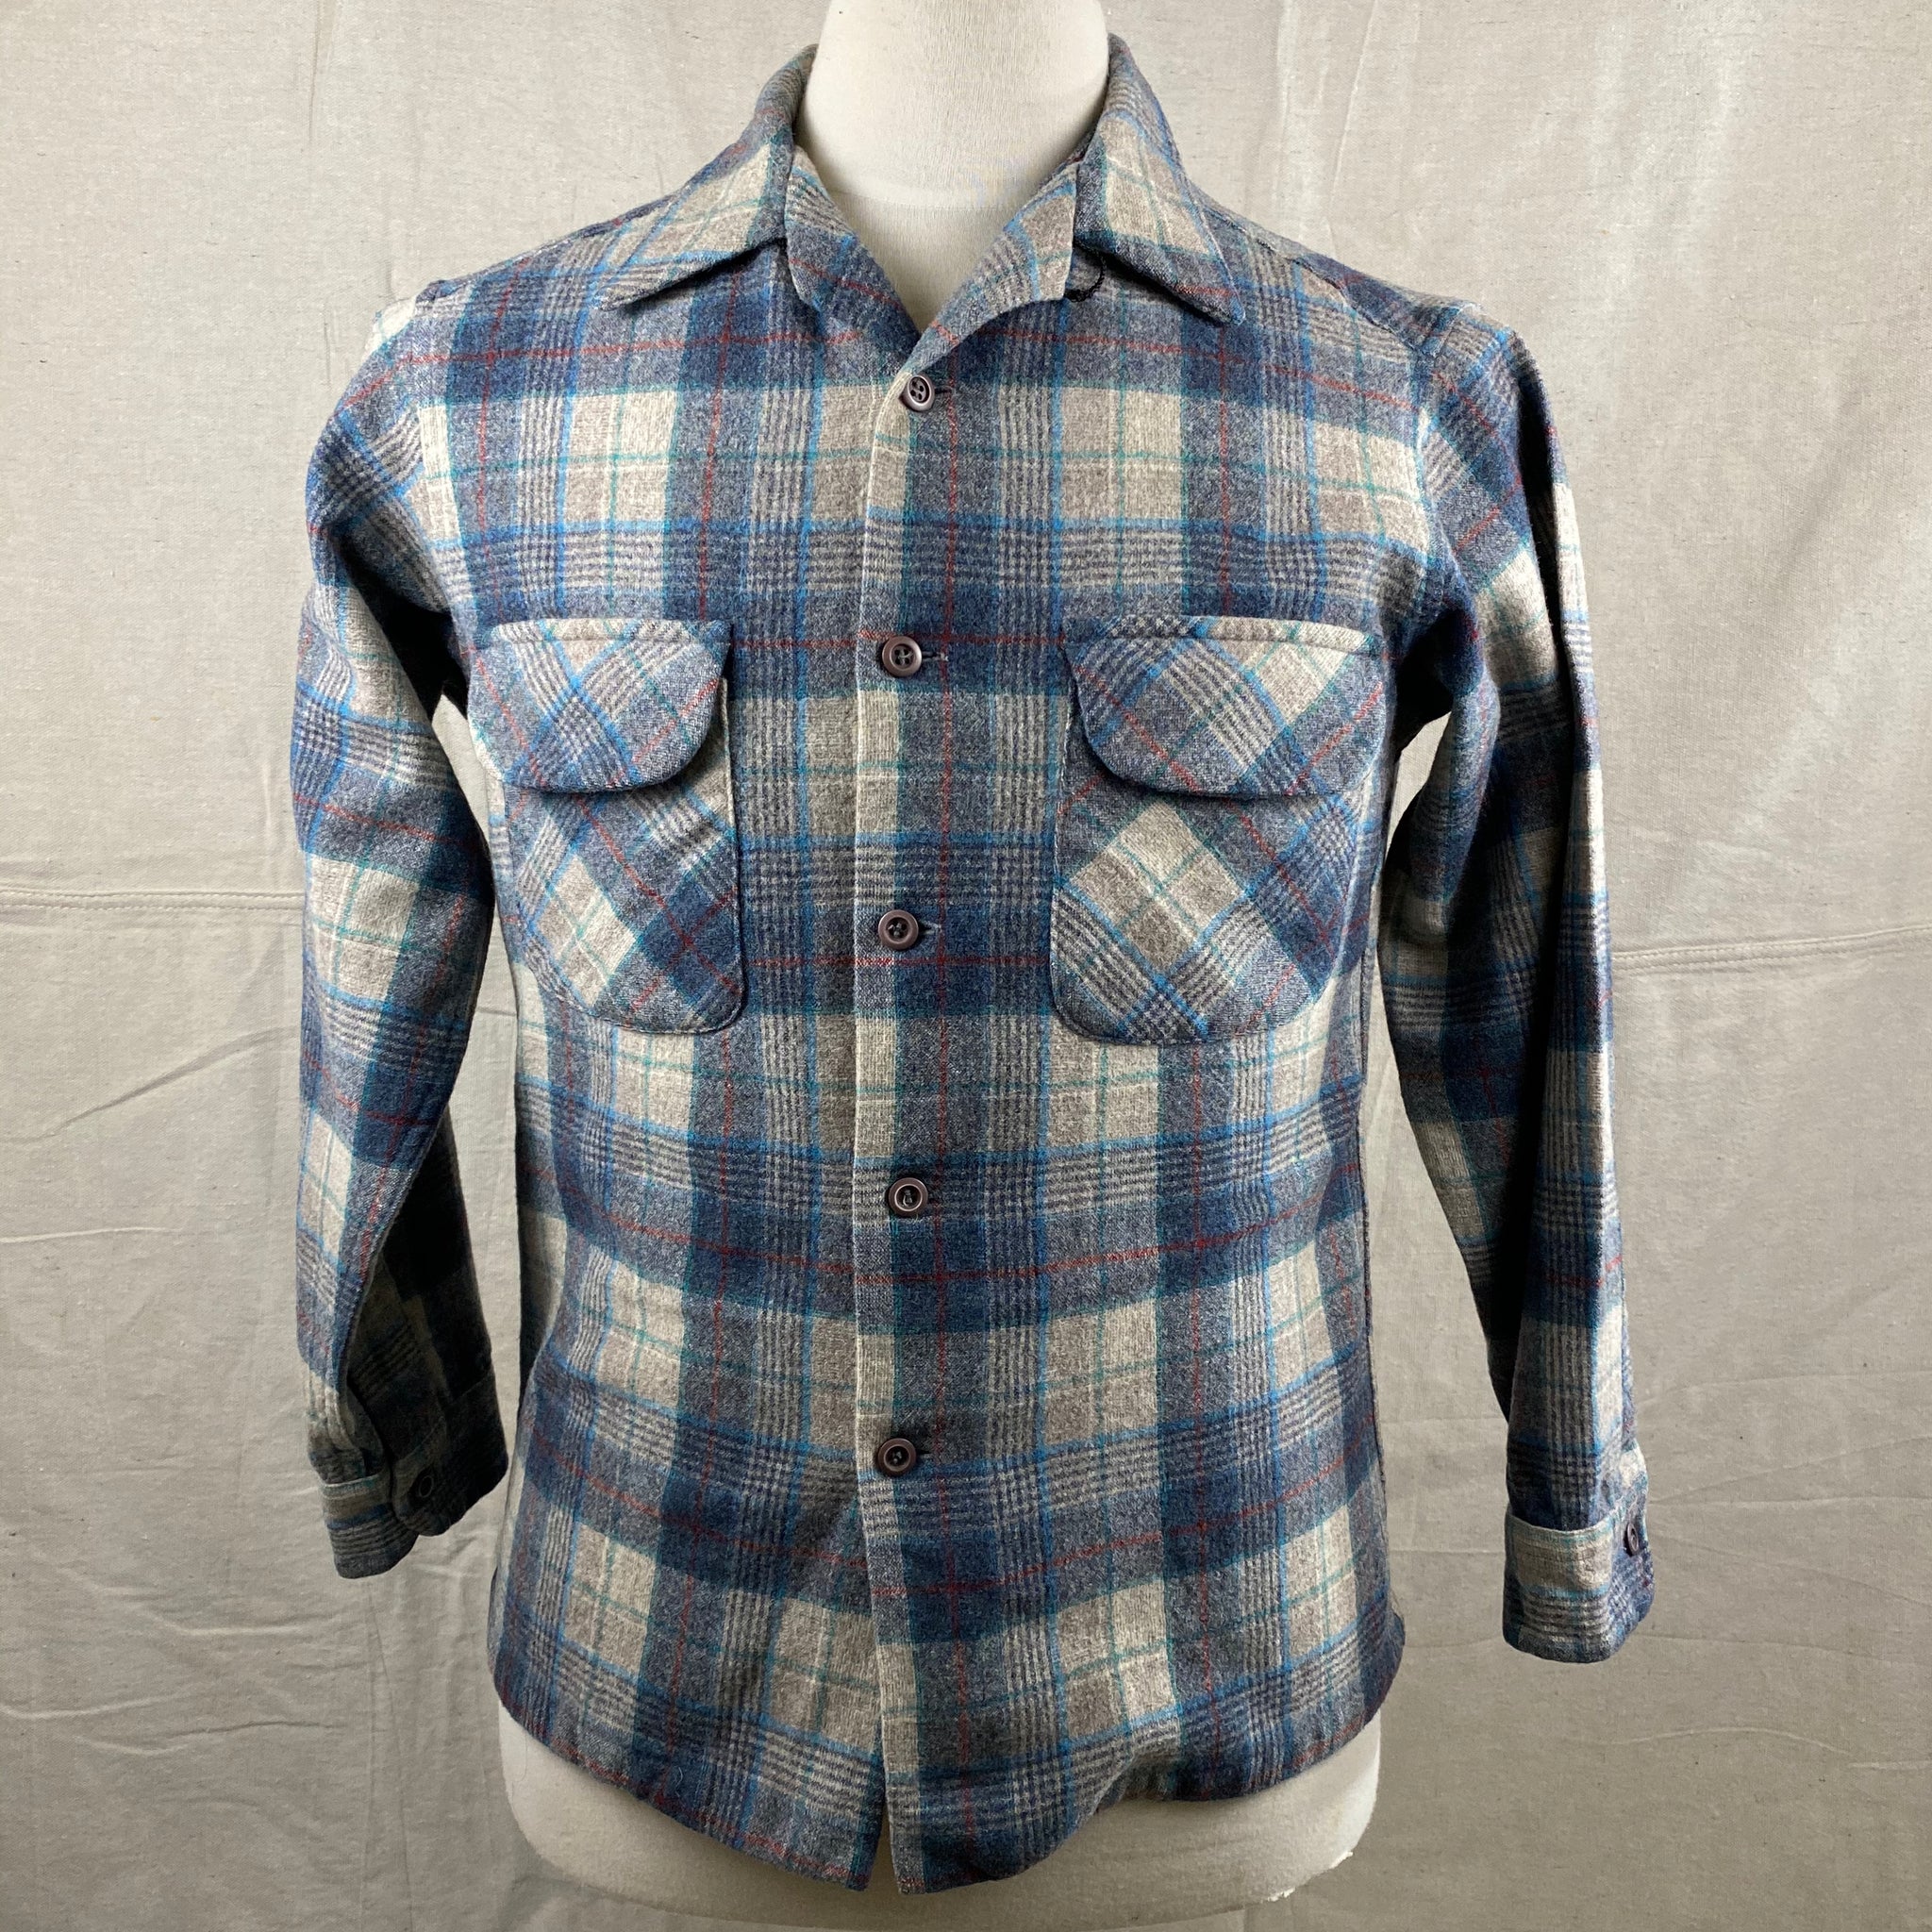 Front View of Vintage Blue/Grey/Red Pendleton Board Shirt SZ M